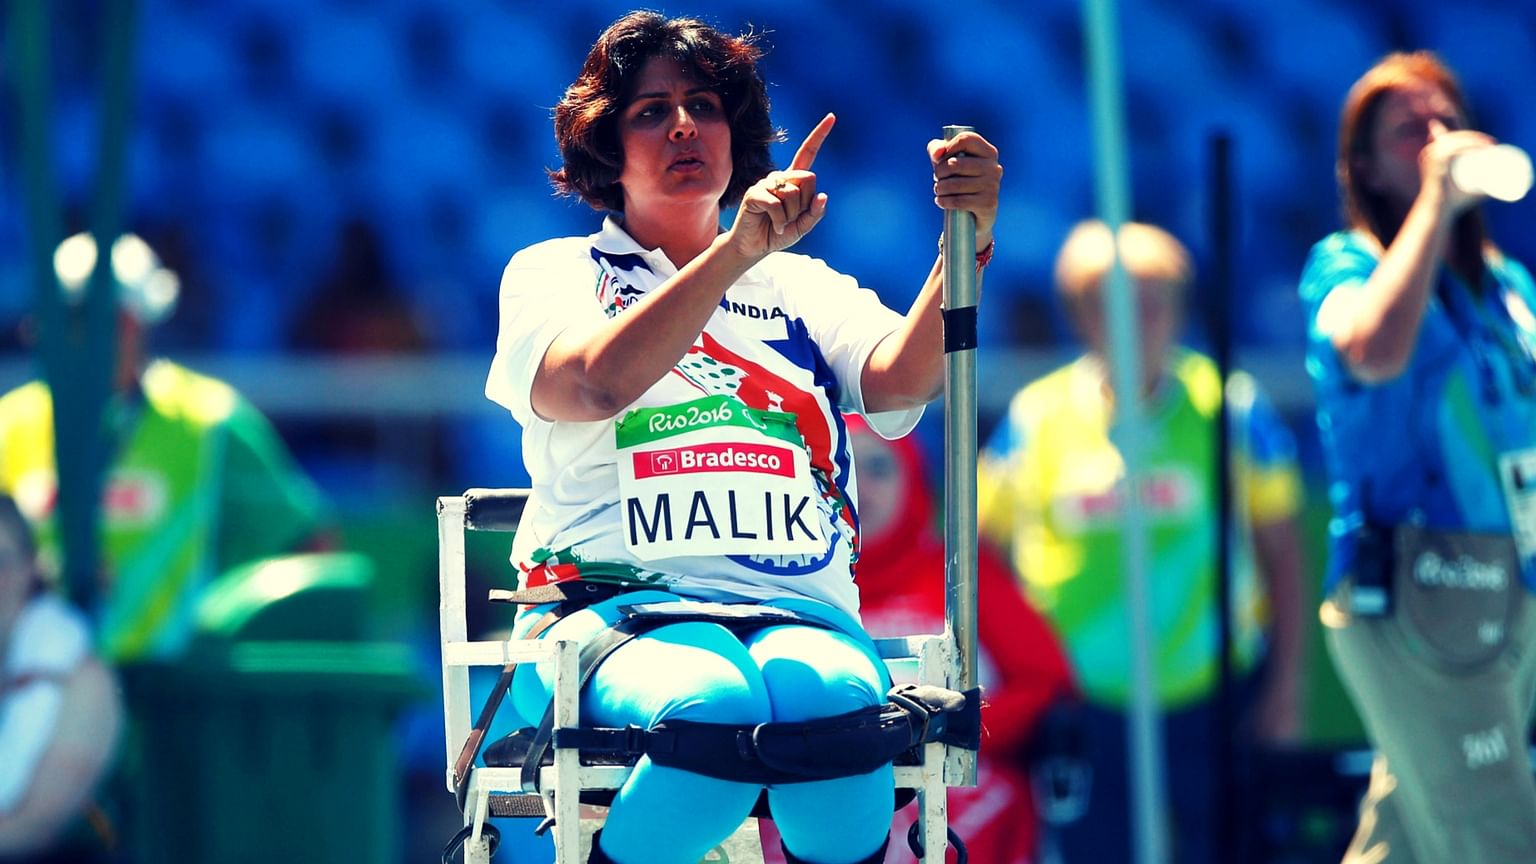 India’s Deepa Malik gestures as she competes in the women’s shotput event at the Rio Paralympics. (Photo: AP)